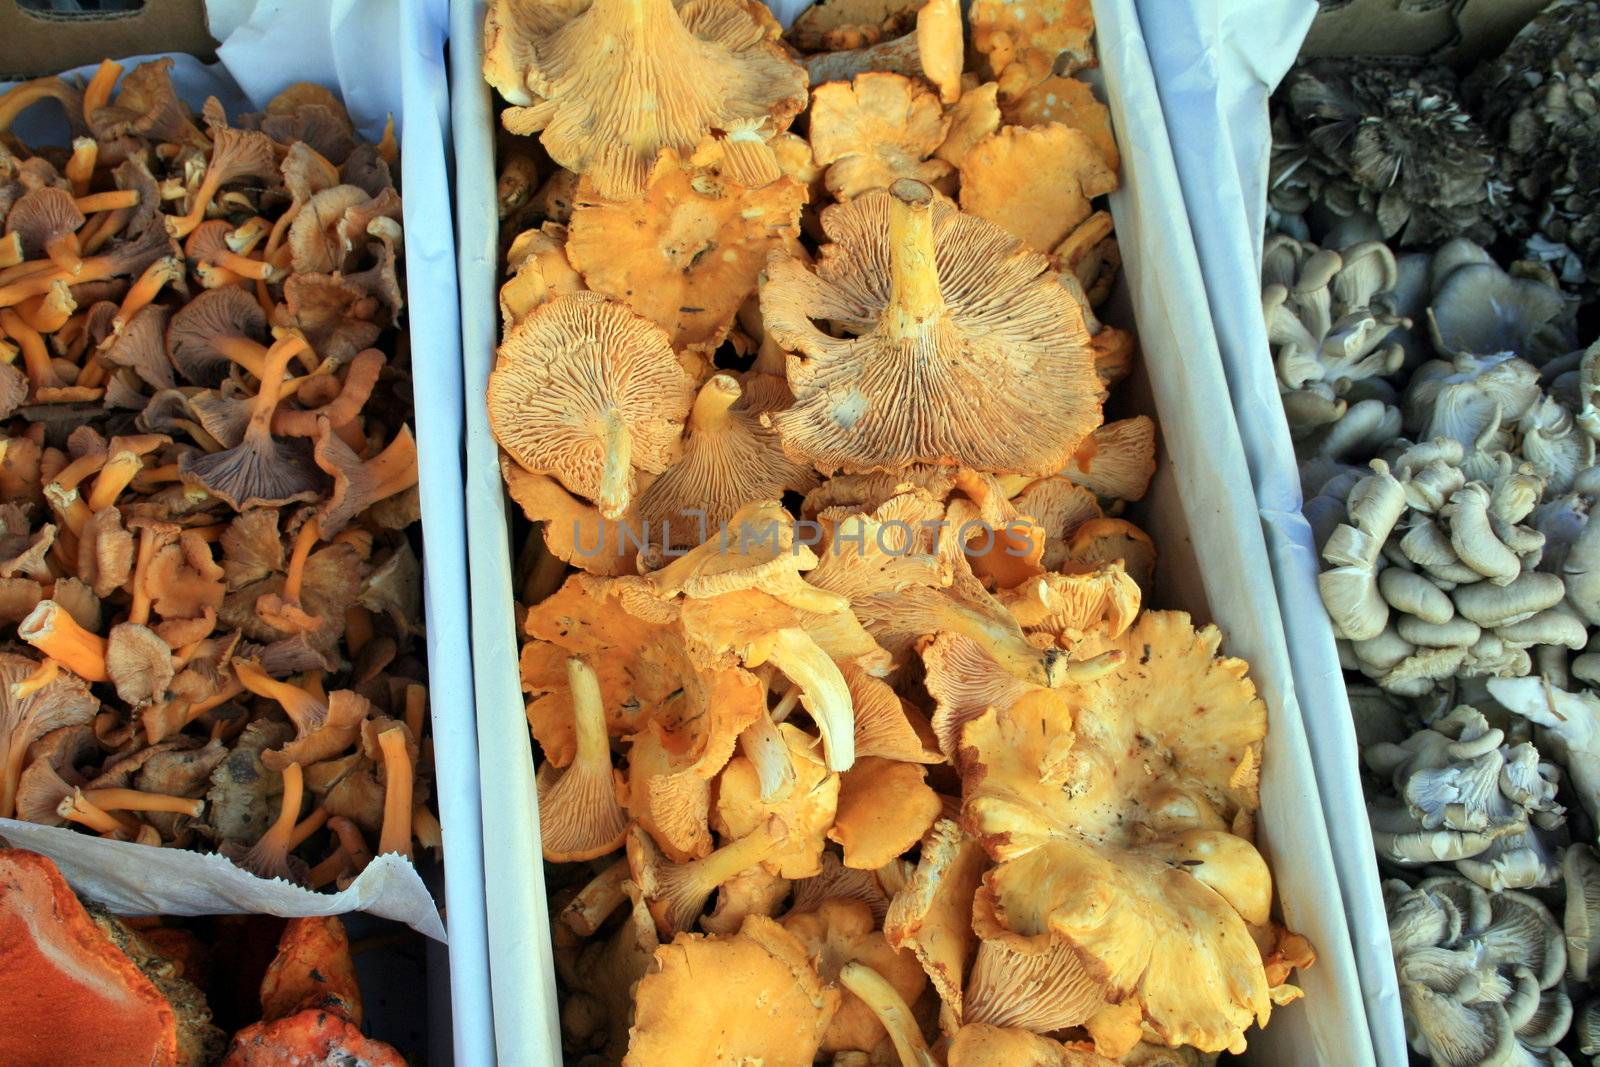 Fresh Shiitake mushrooms in center, with other varieties of mushrooms on either side